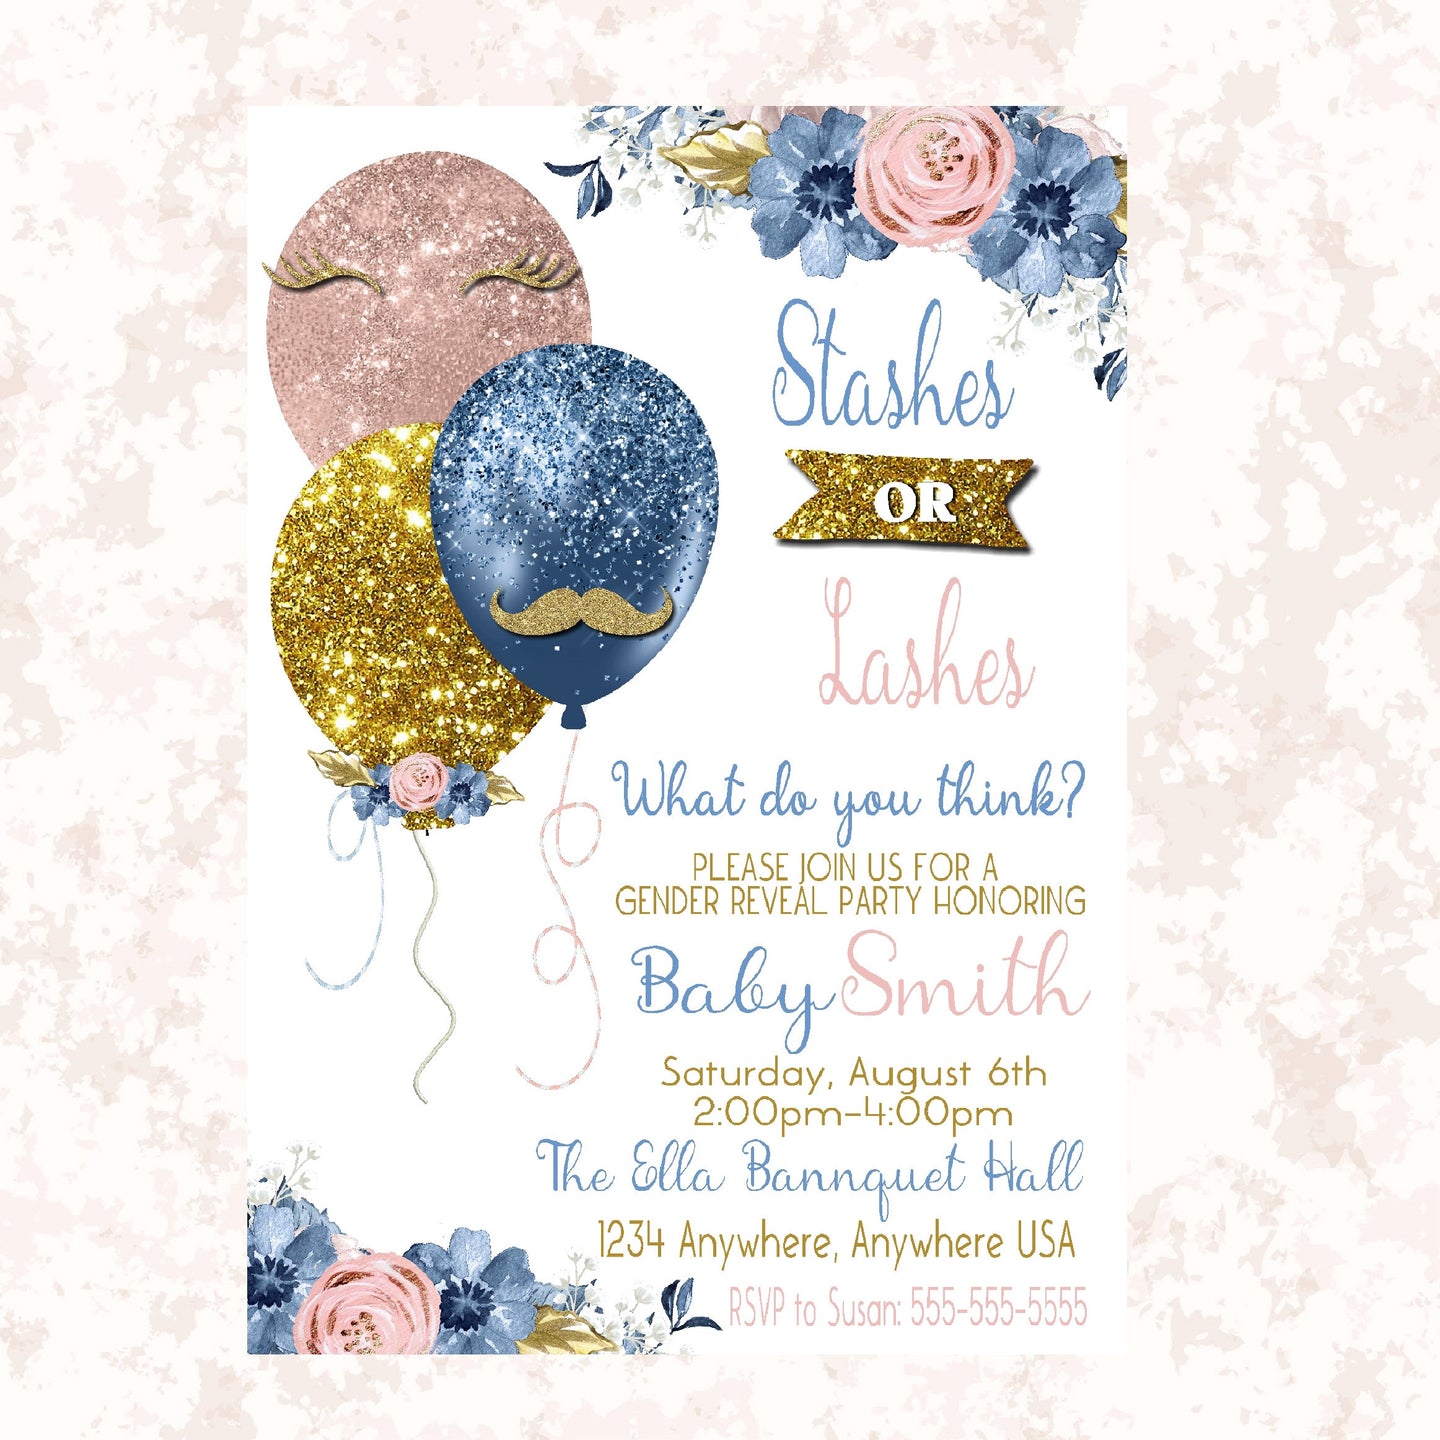 Balloon Gender Reveal  Invitation, Boy or girl, Stashes or Lashes  Baby , Invite blue or pink  printable  blue blush pink gold Glitter, 009